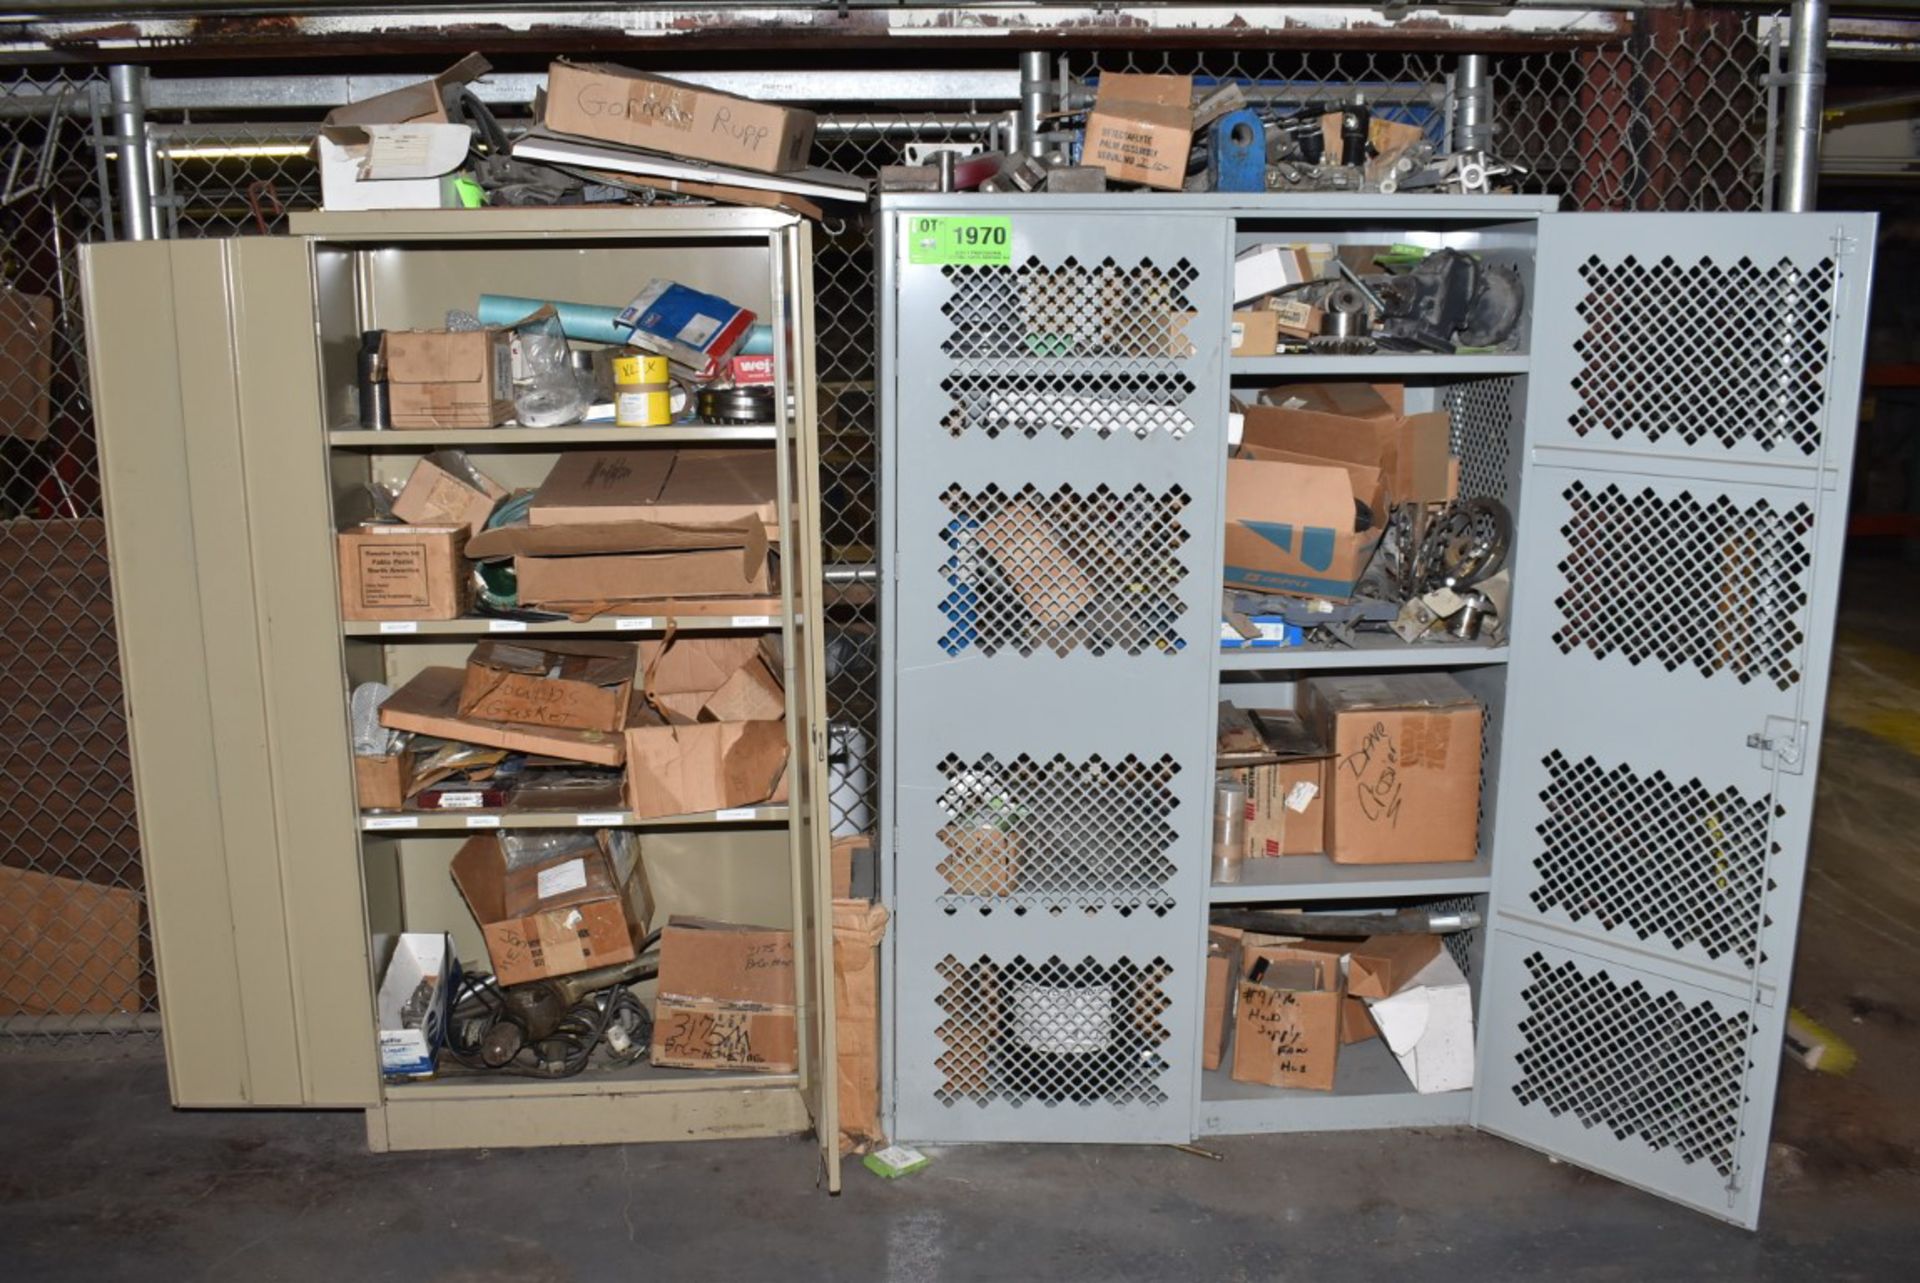 LOT/ (2) STORAGE CABINETS WITH CONTENTS - INCLUDING SPARE PARTS & SHOP SUPPLIES